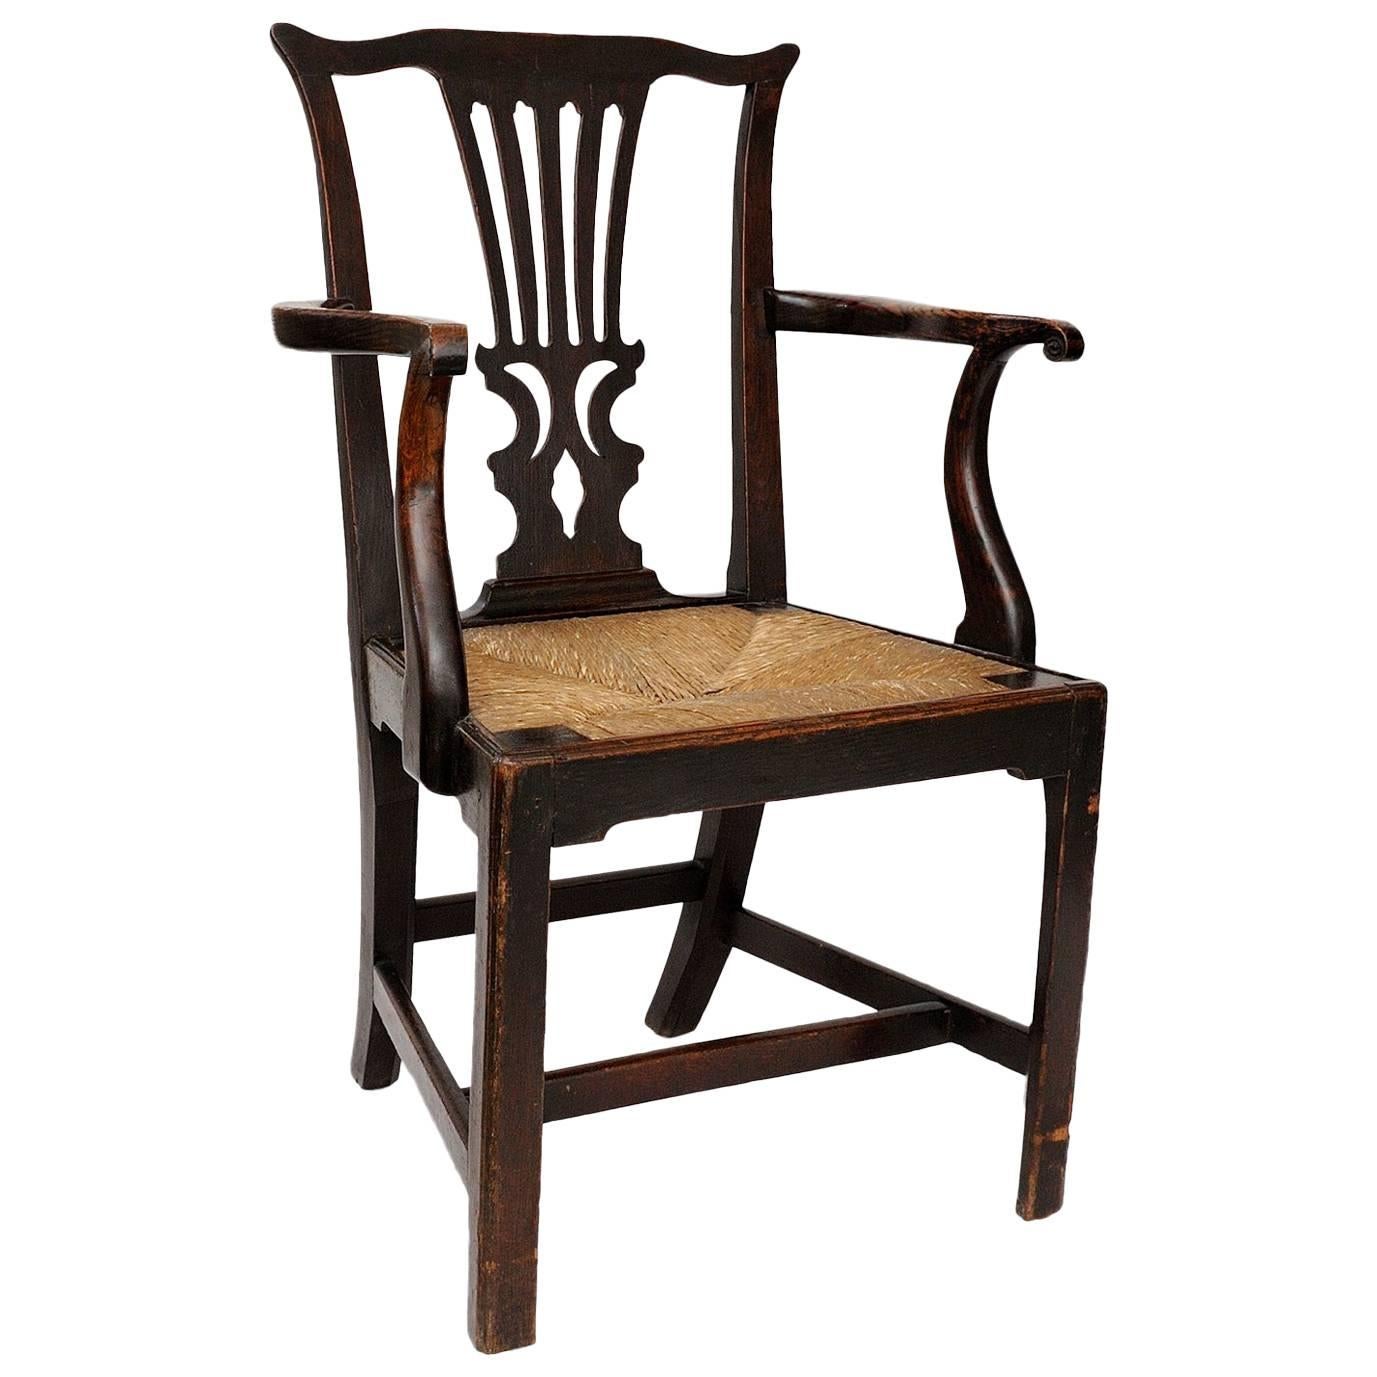 English George III Oak Chippendale Open Arm or Desk Chair, circa 1760